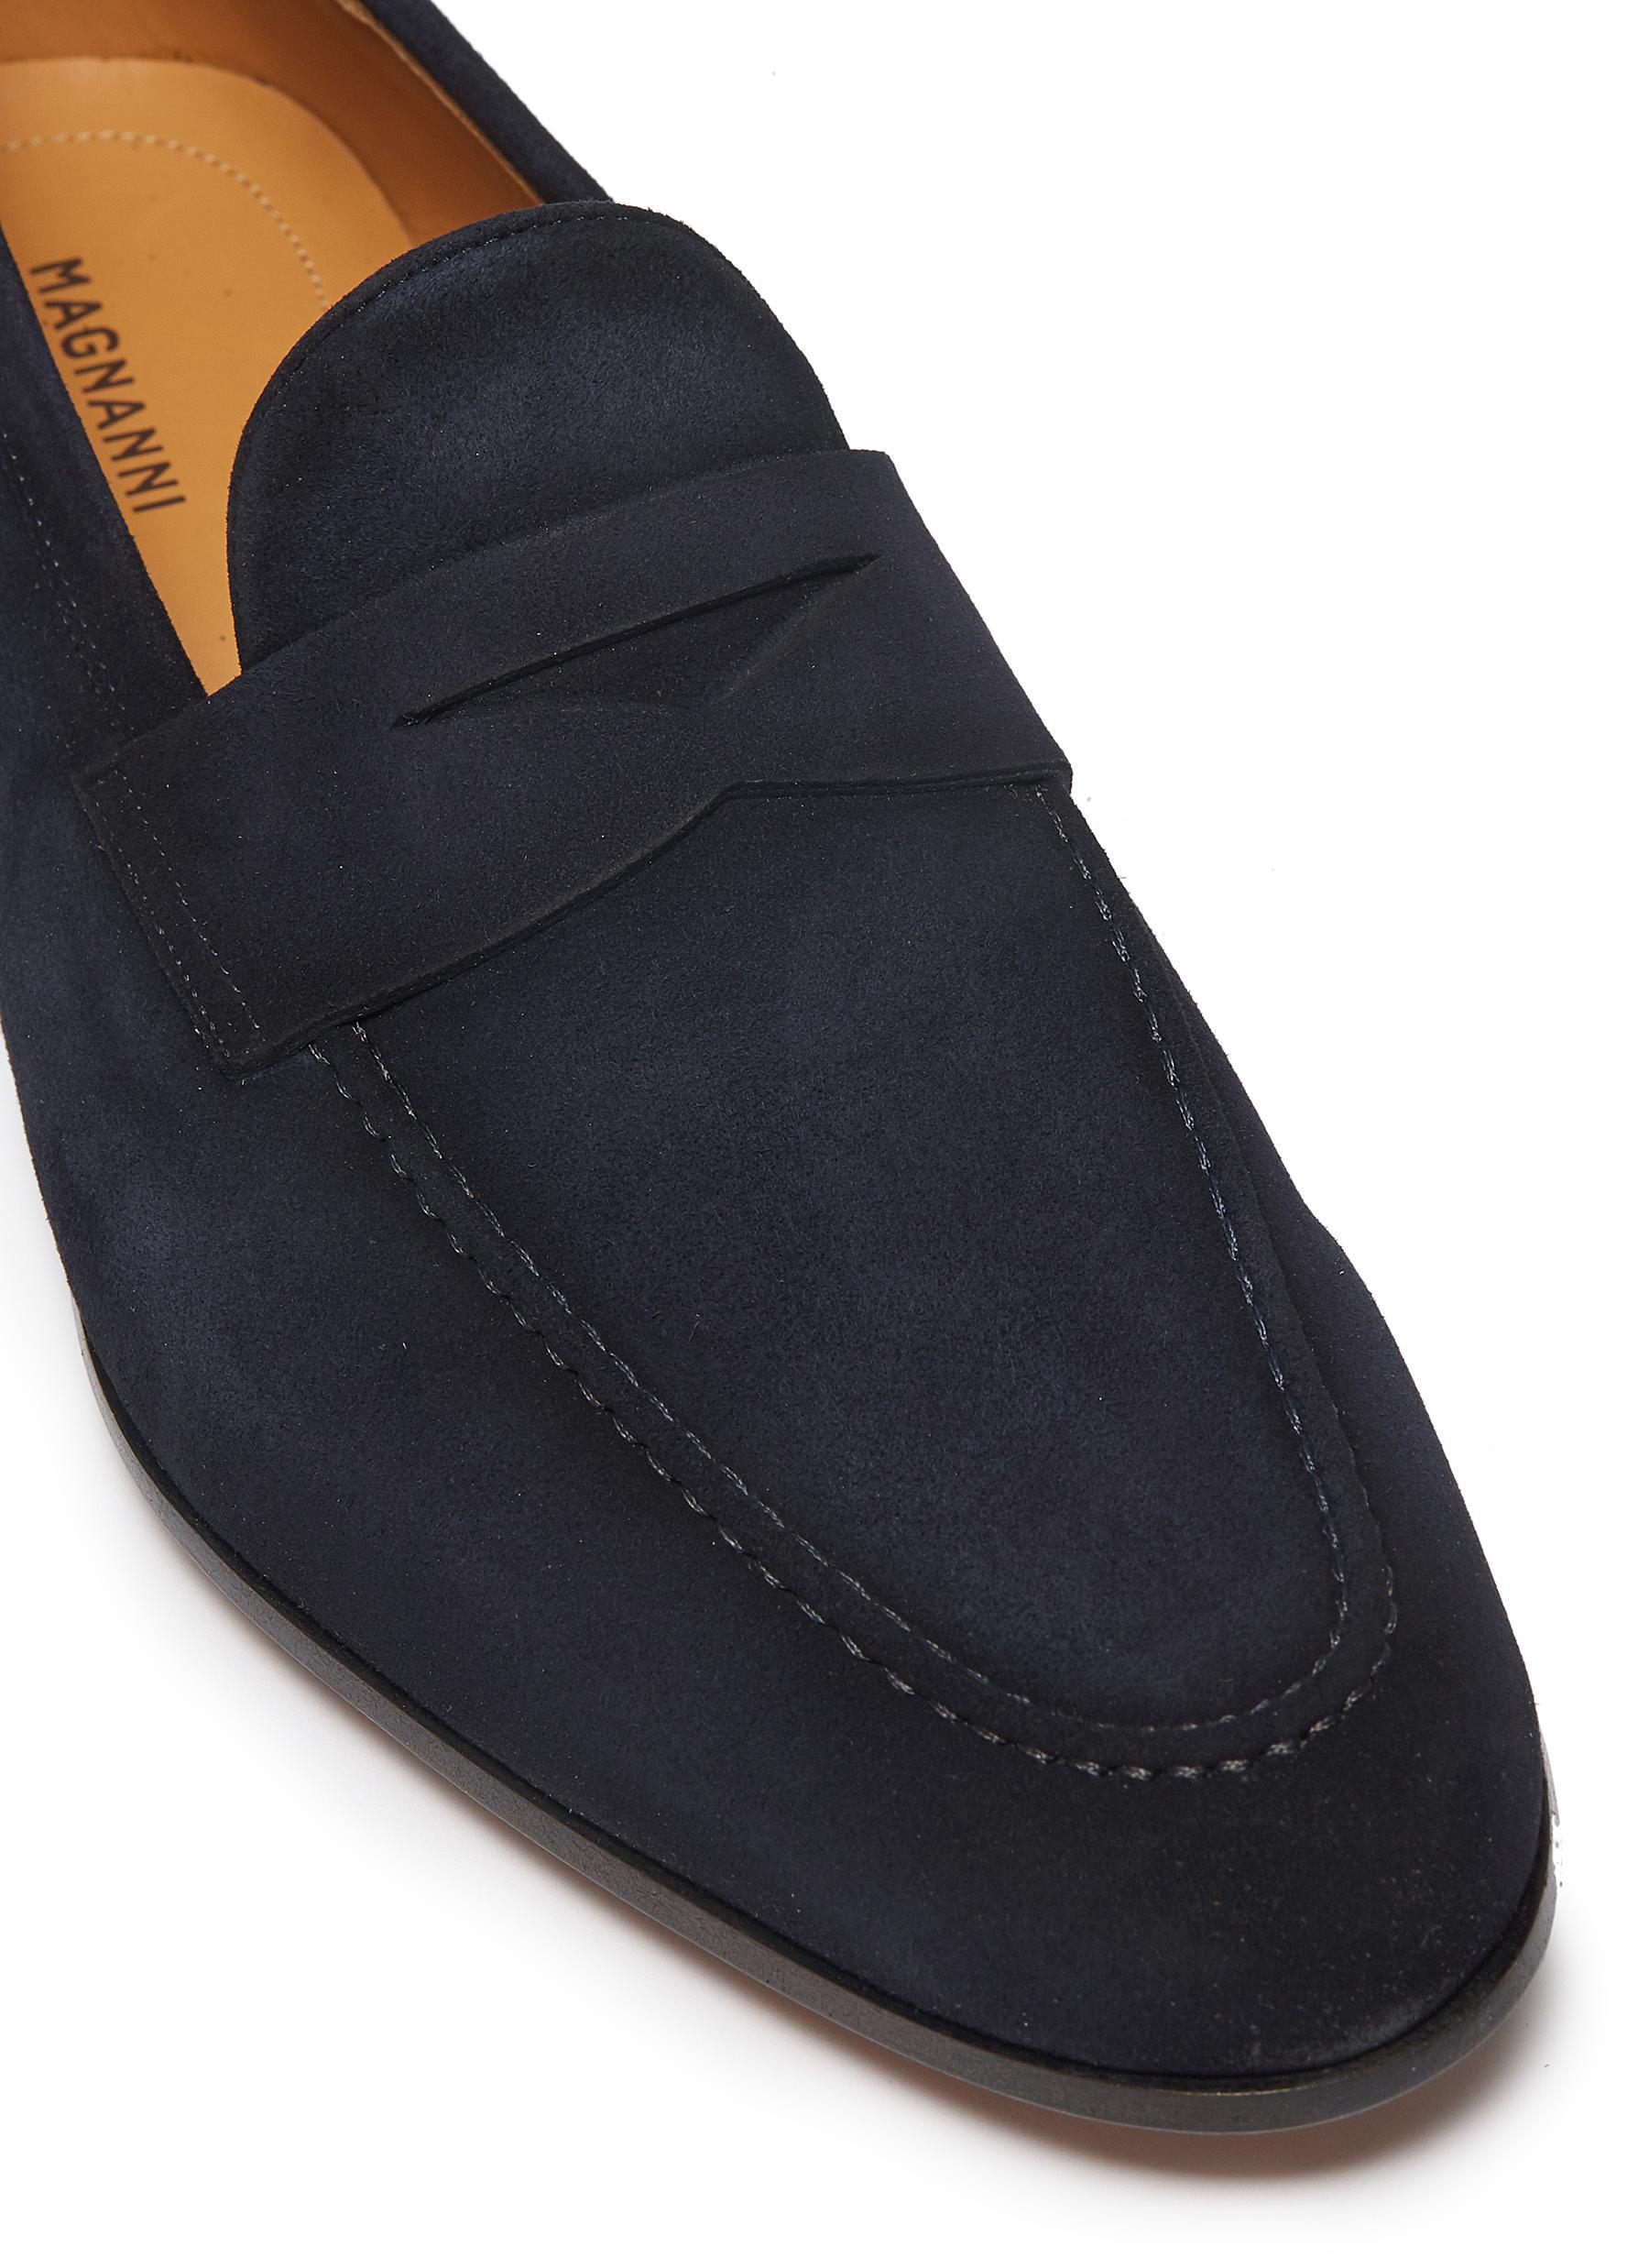 stilte ontsnapping uit de gevangenis Westers Magnanni Suede Penny Loafers in Navy (Blue) for Men - Lyst